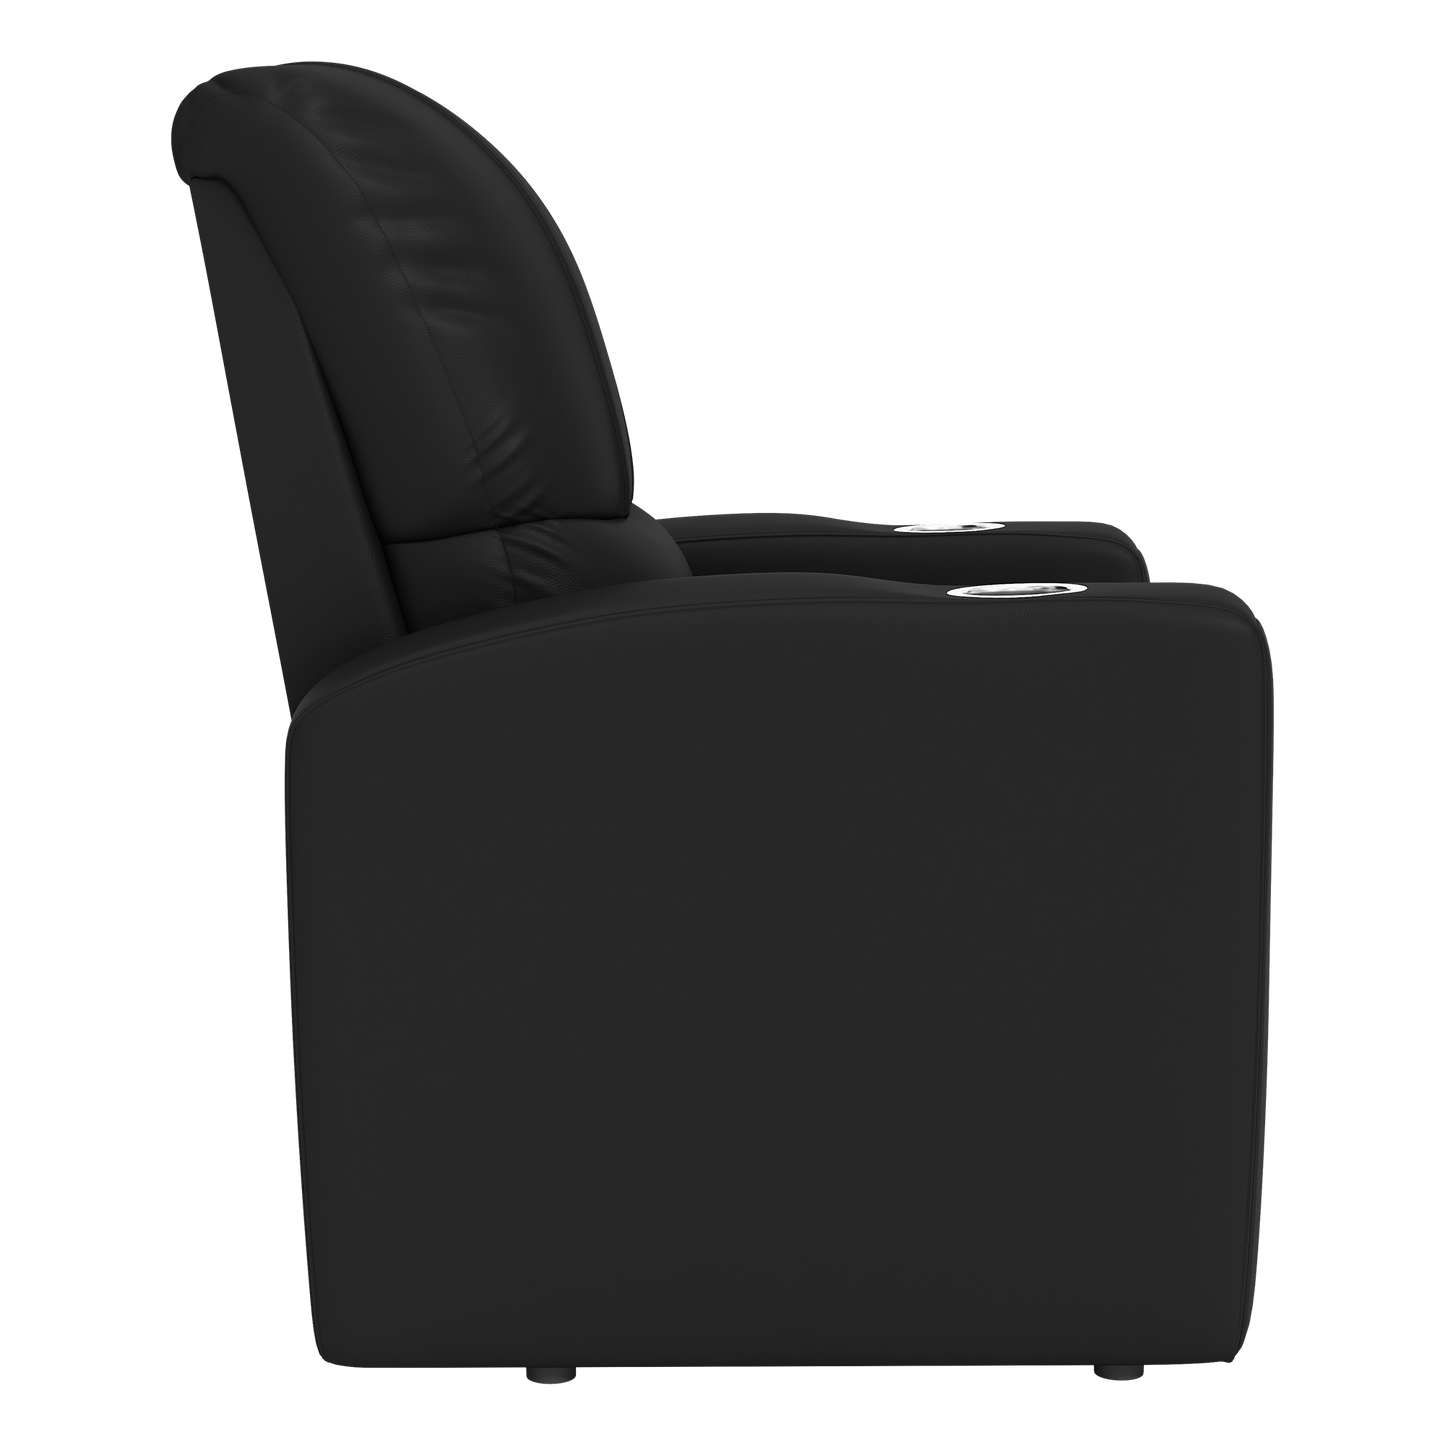 Stealth Recliner with Houston Dynamo Primary Logo